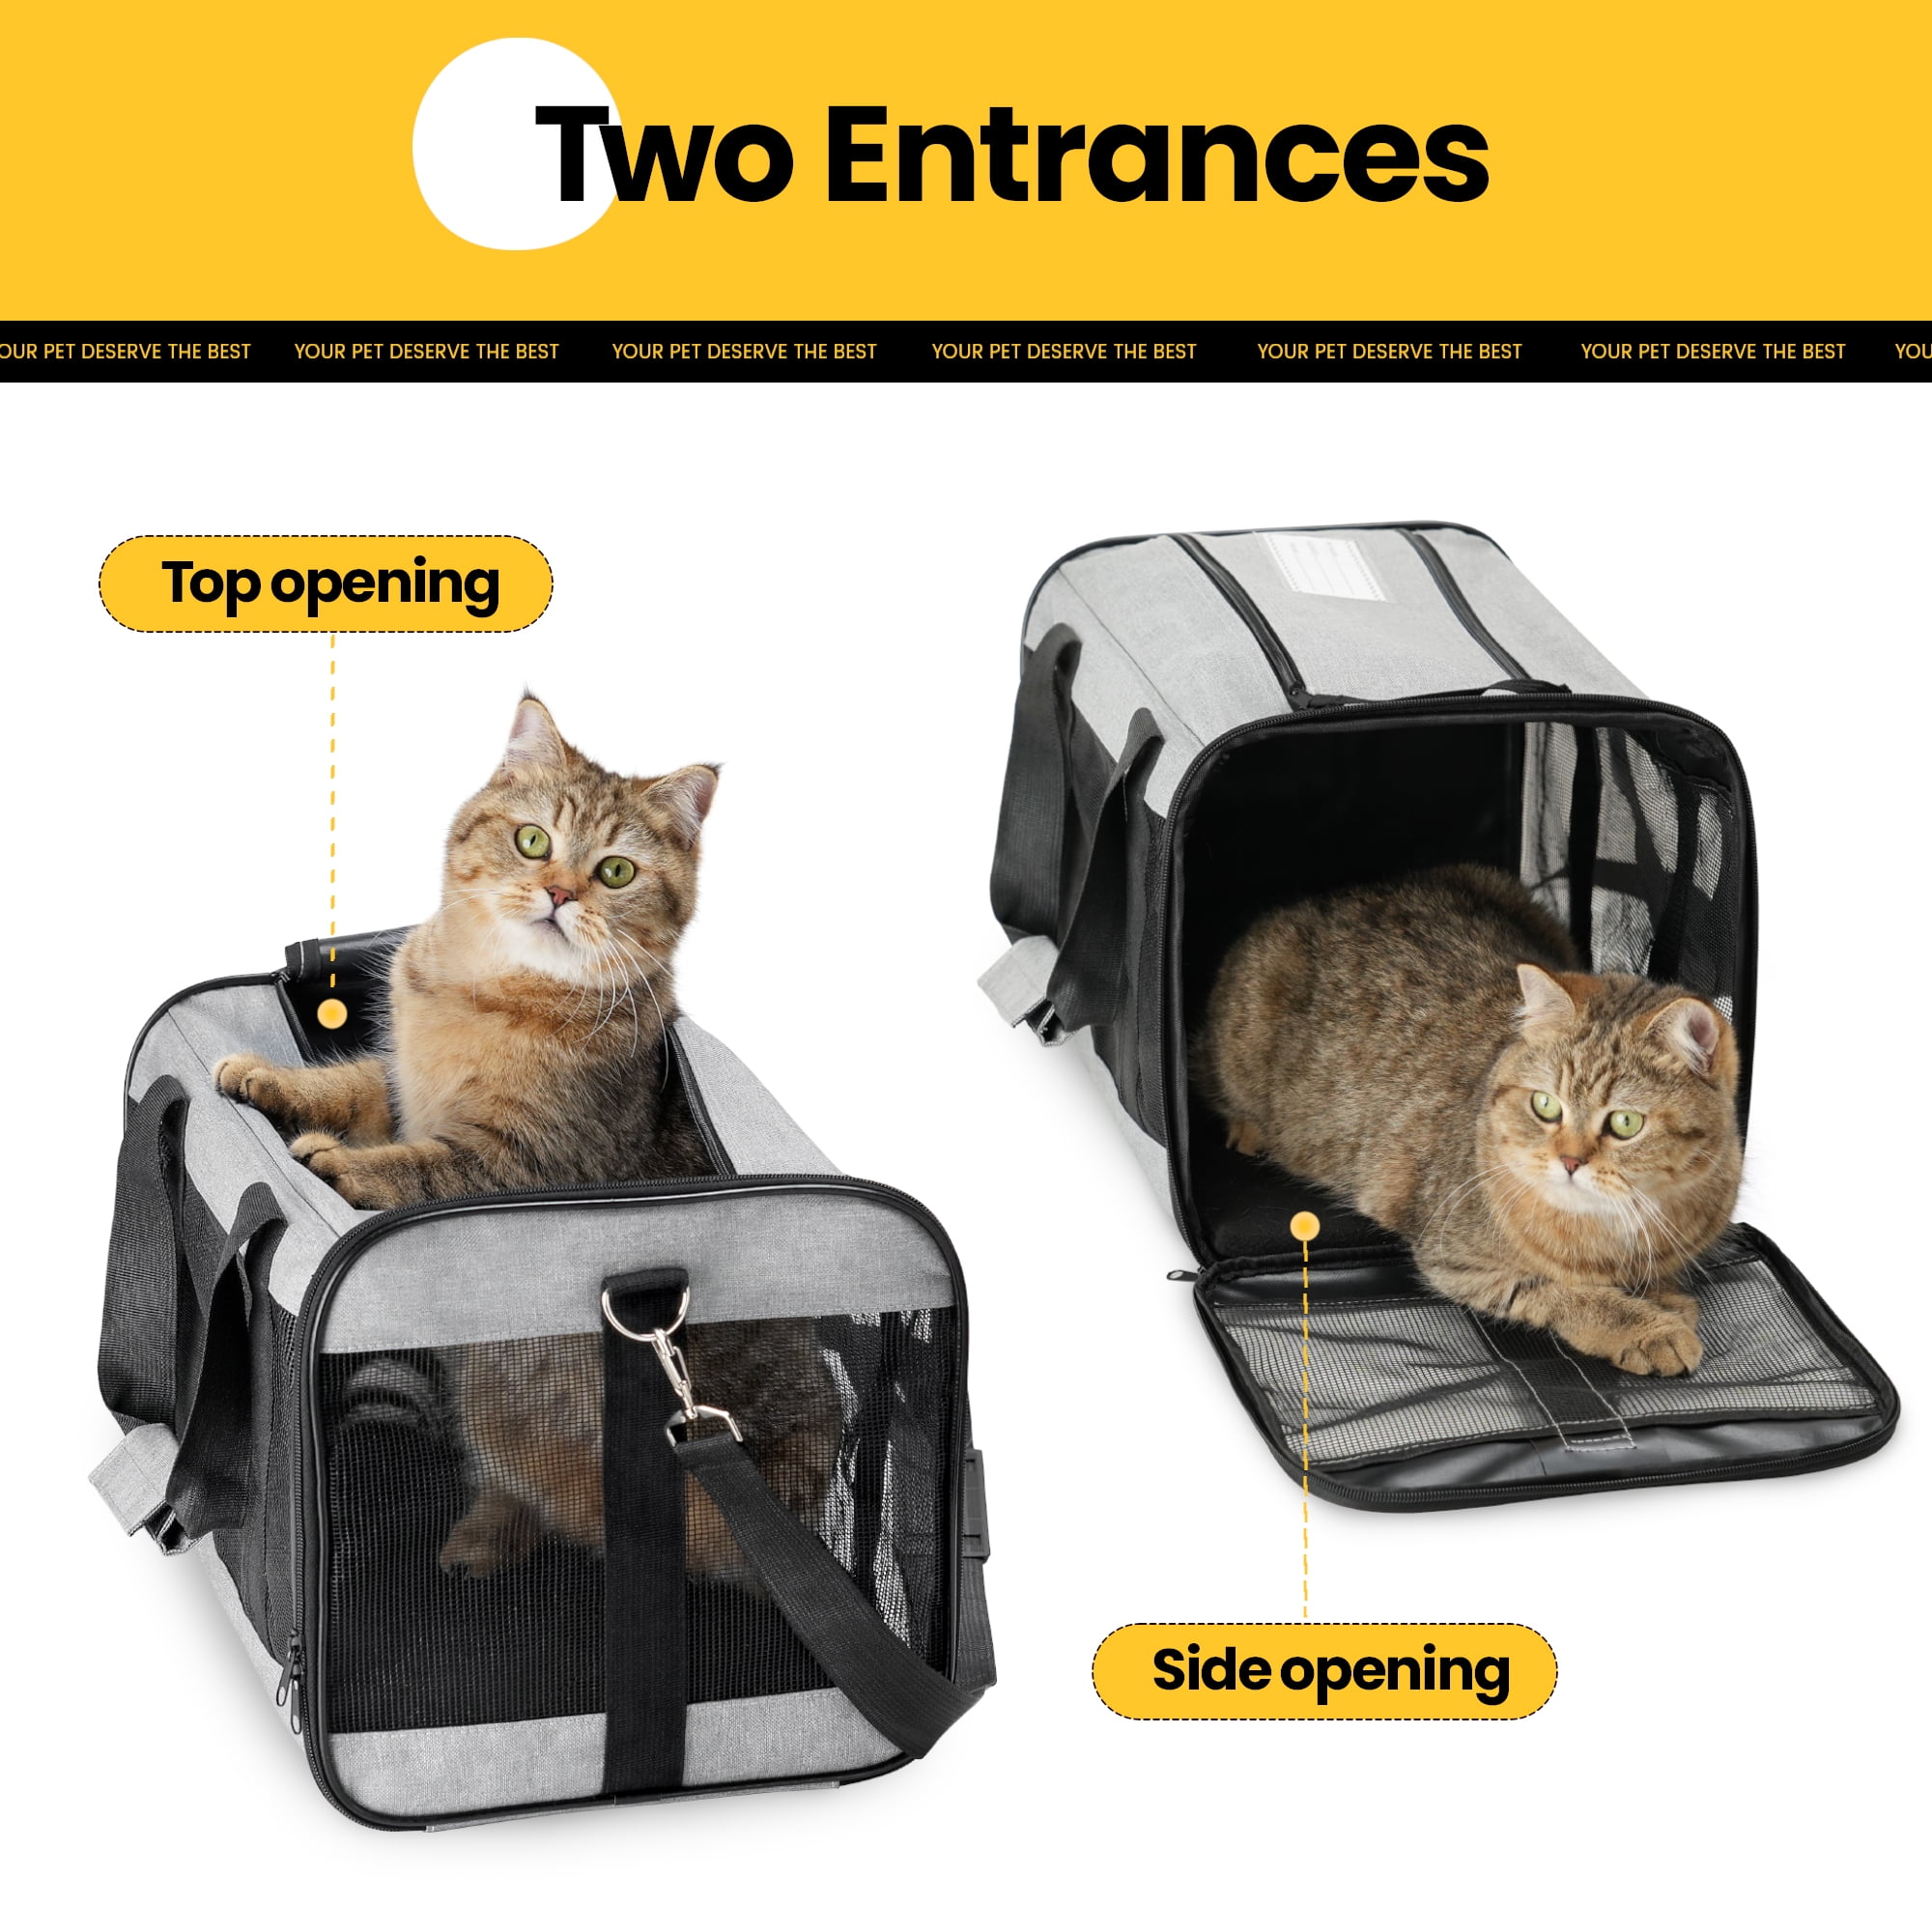 Mancro Cat Carrier, Pet Carrier Airline Approved for Medium Cats 20lbs, Dog  Carrier for Small Dogs and Puppies, Soft Sided Collapsible Top Loading Cat